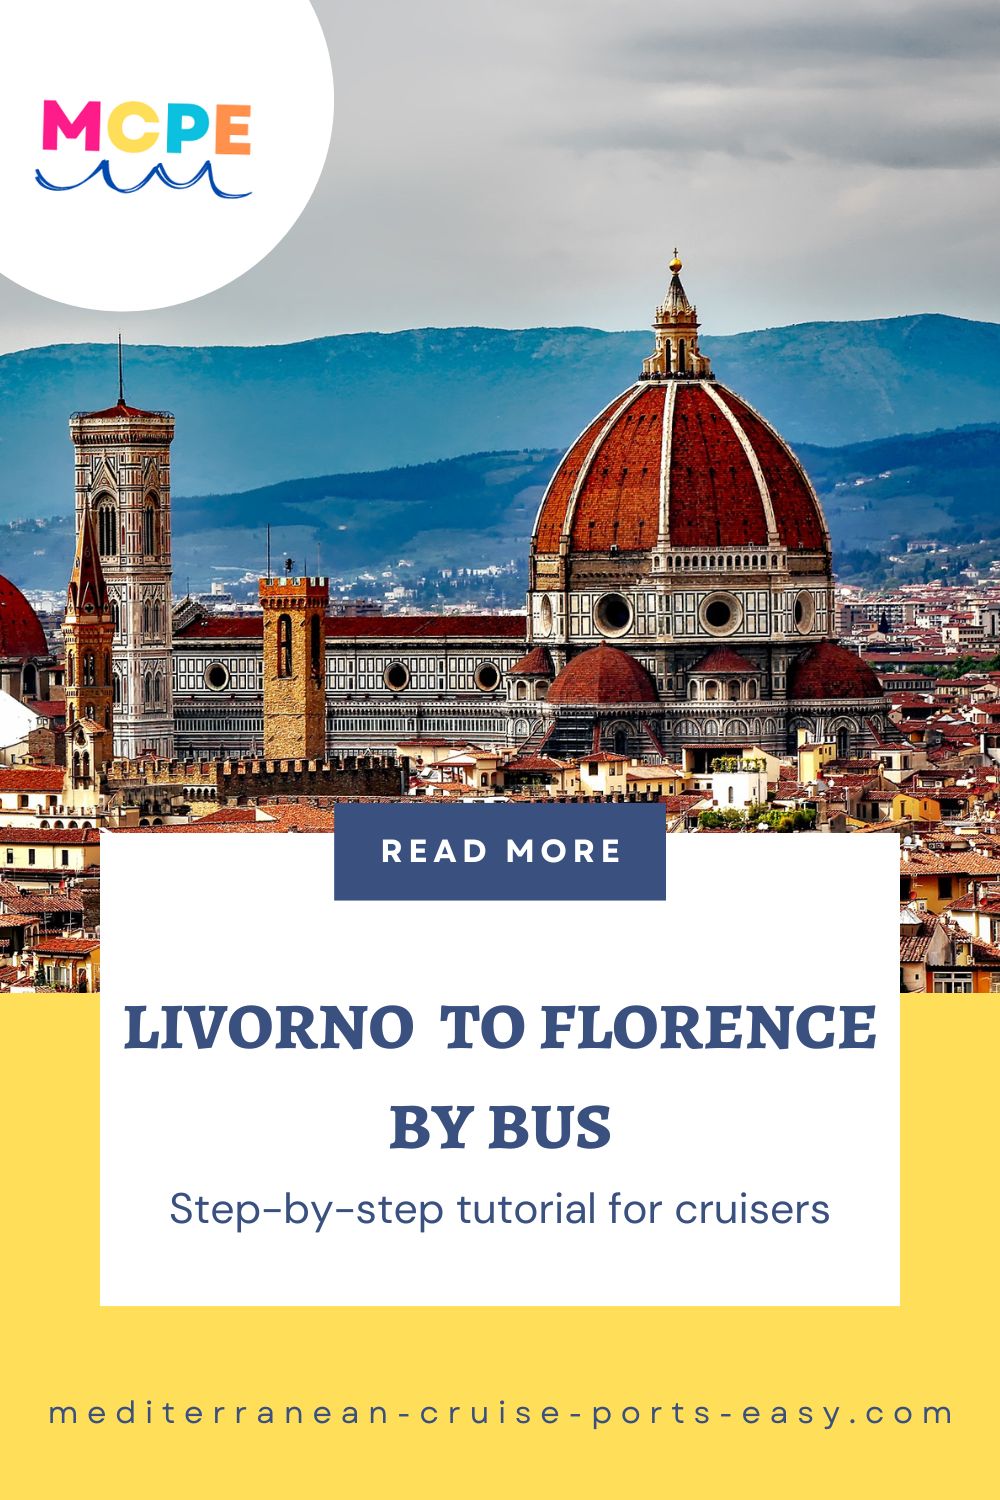 Livorno to Florence by bus